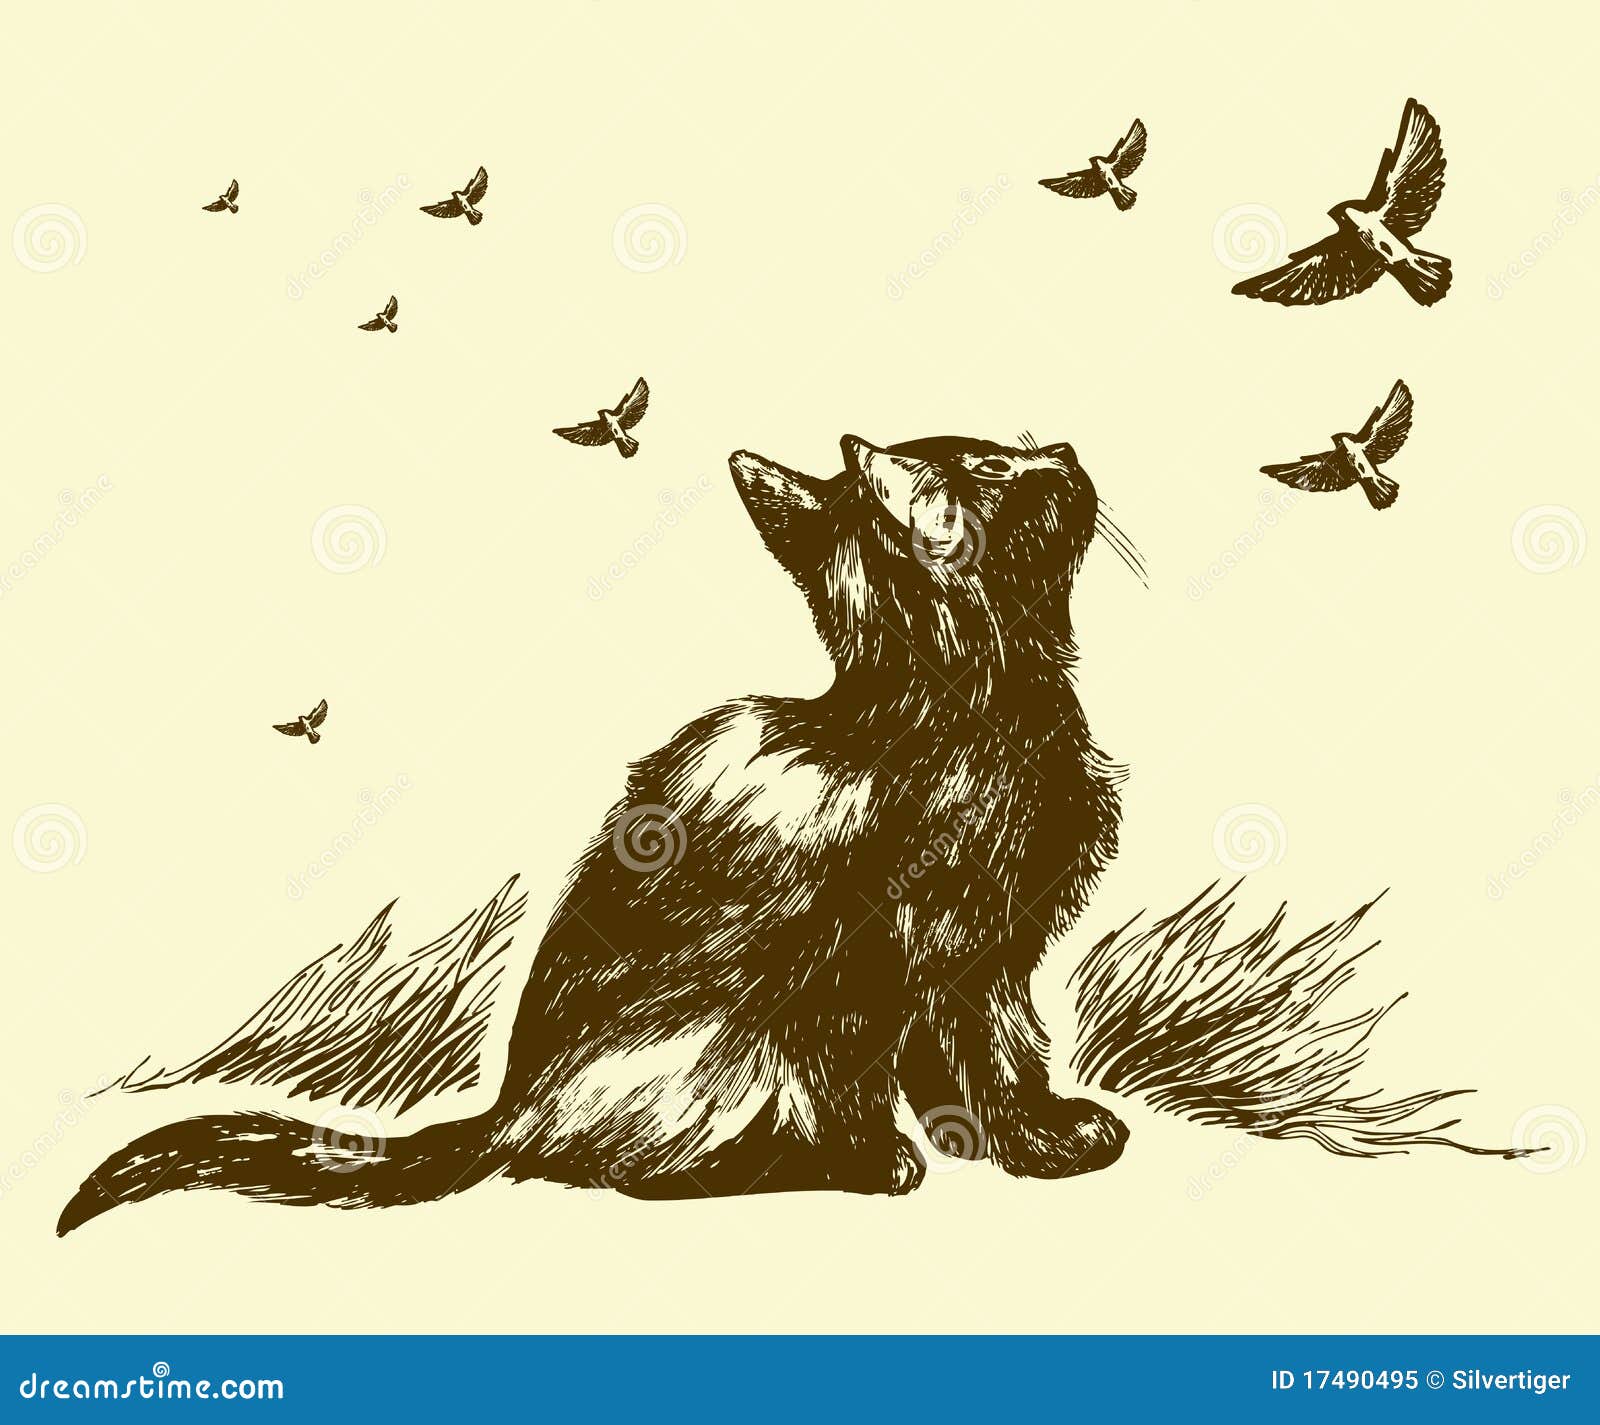 Cat and birds drawing stock vector. Image of lined, beauty - 17490495